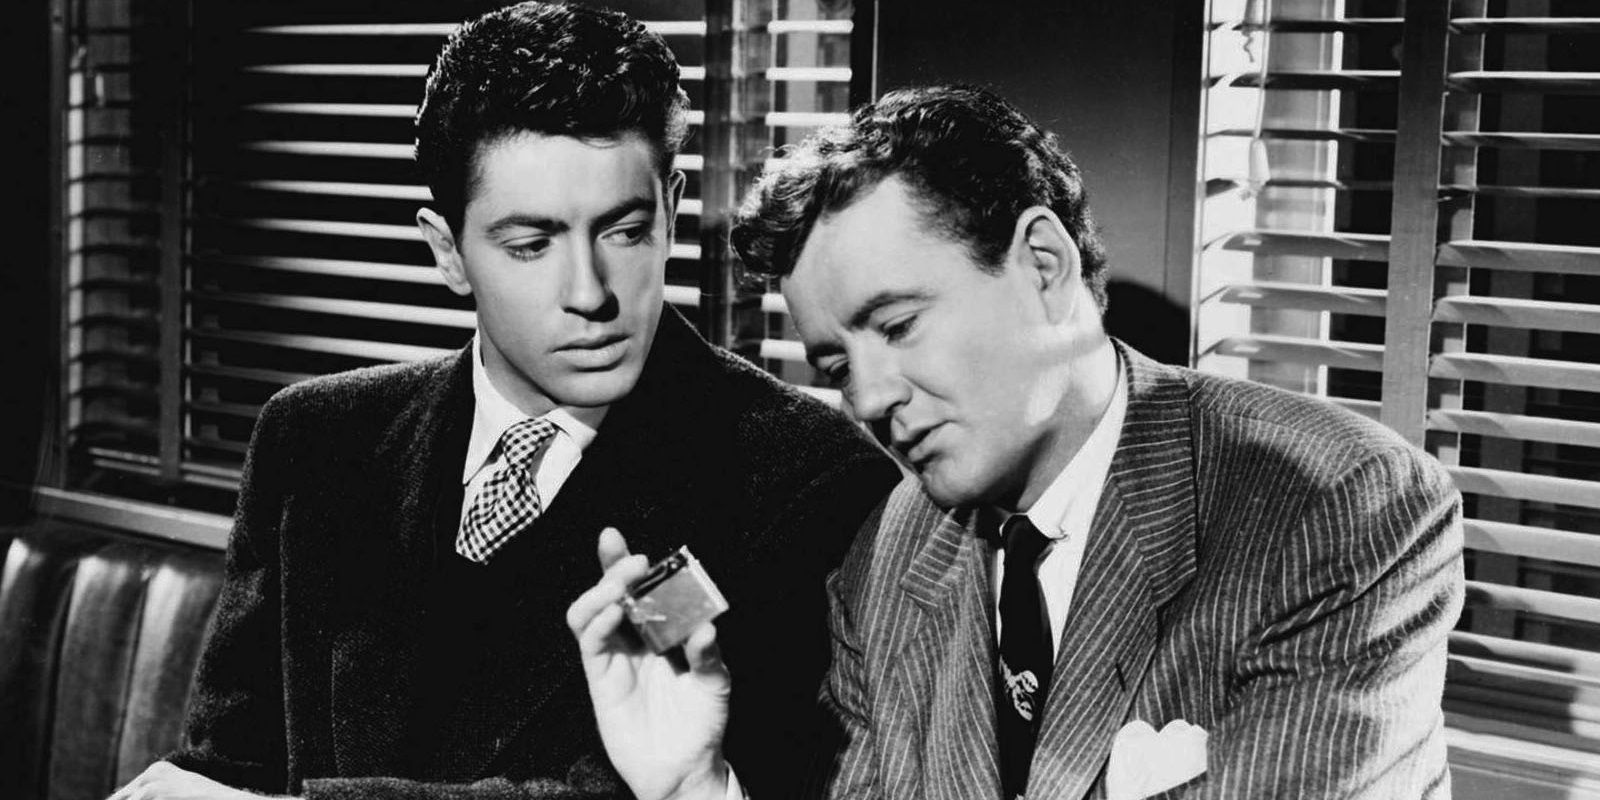 Guy and Bruno in Alfred Hitchcock's Strangers on a Train